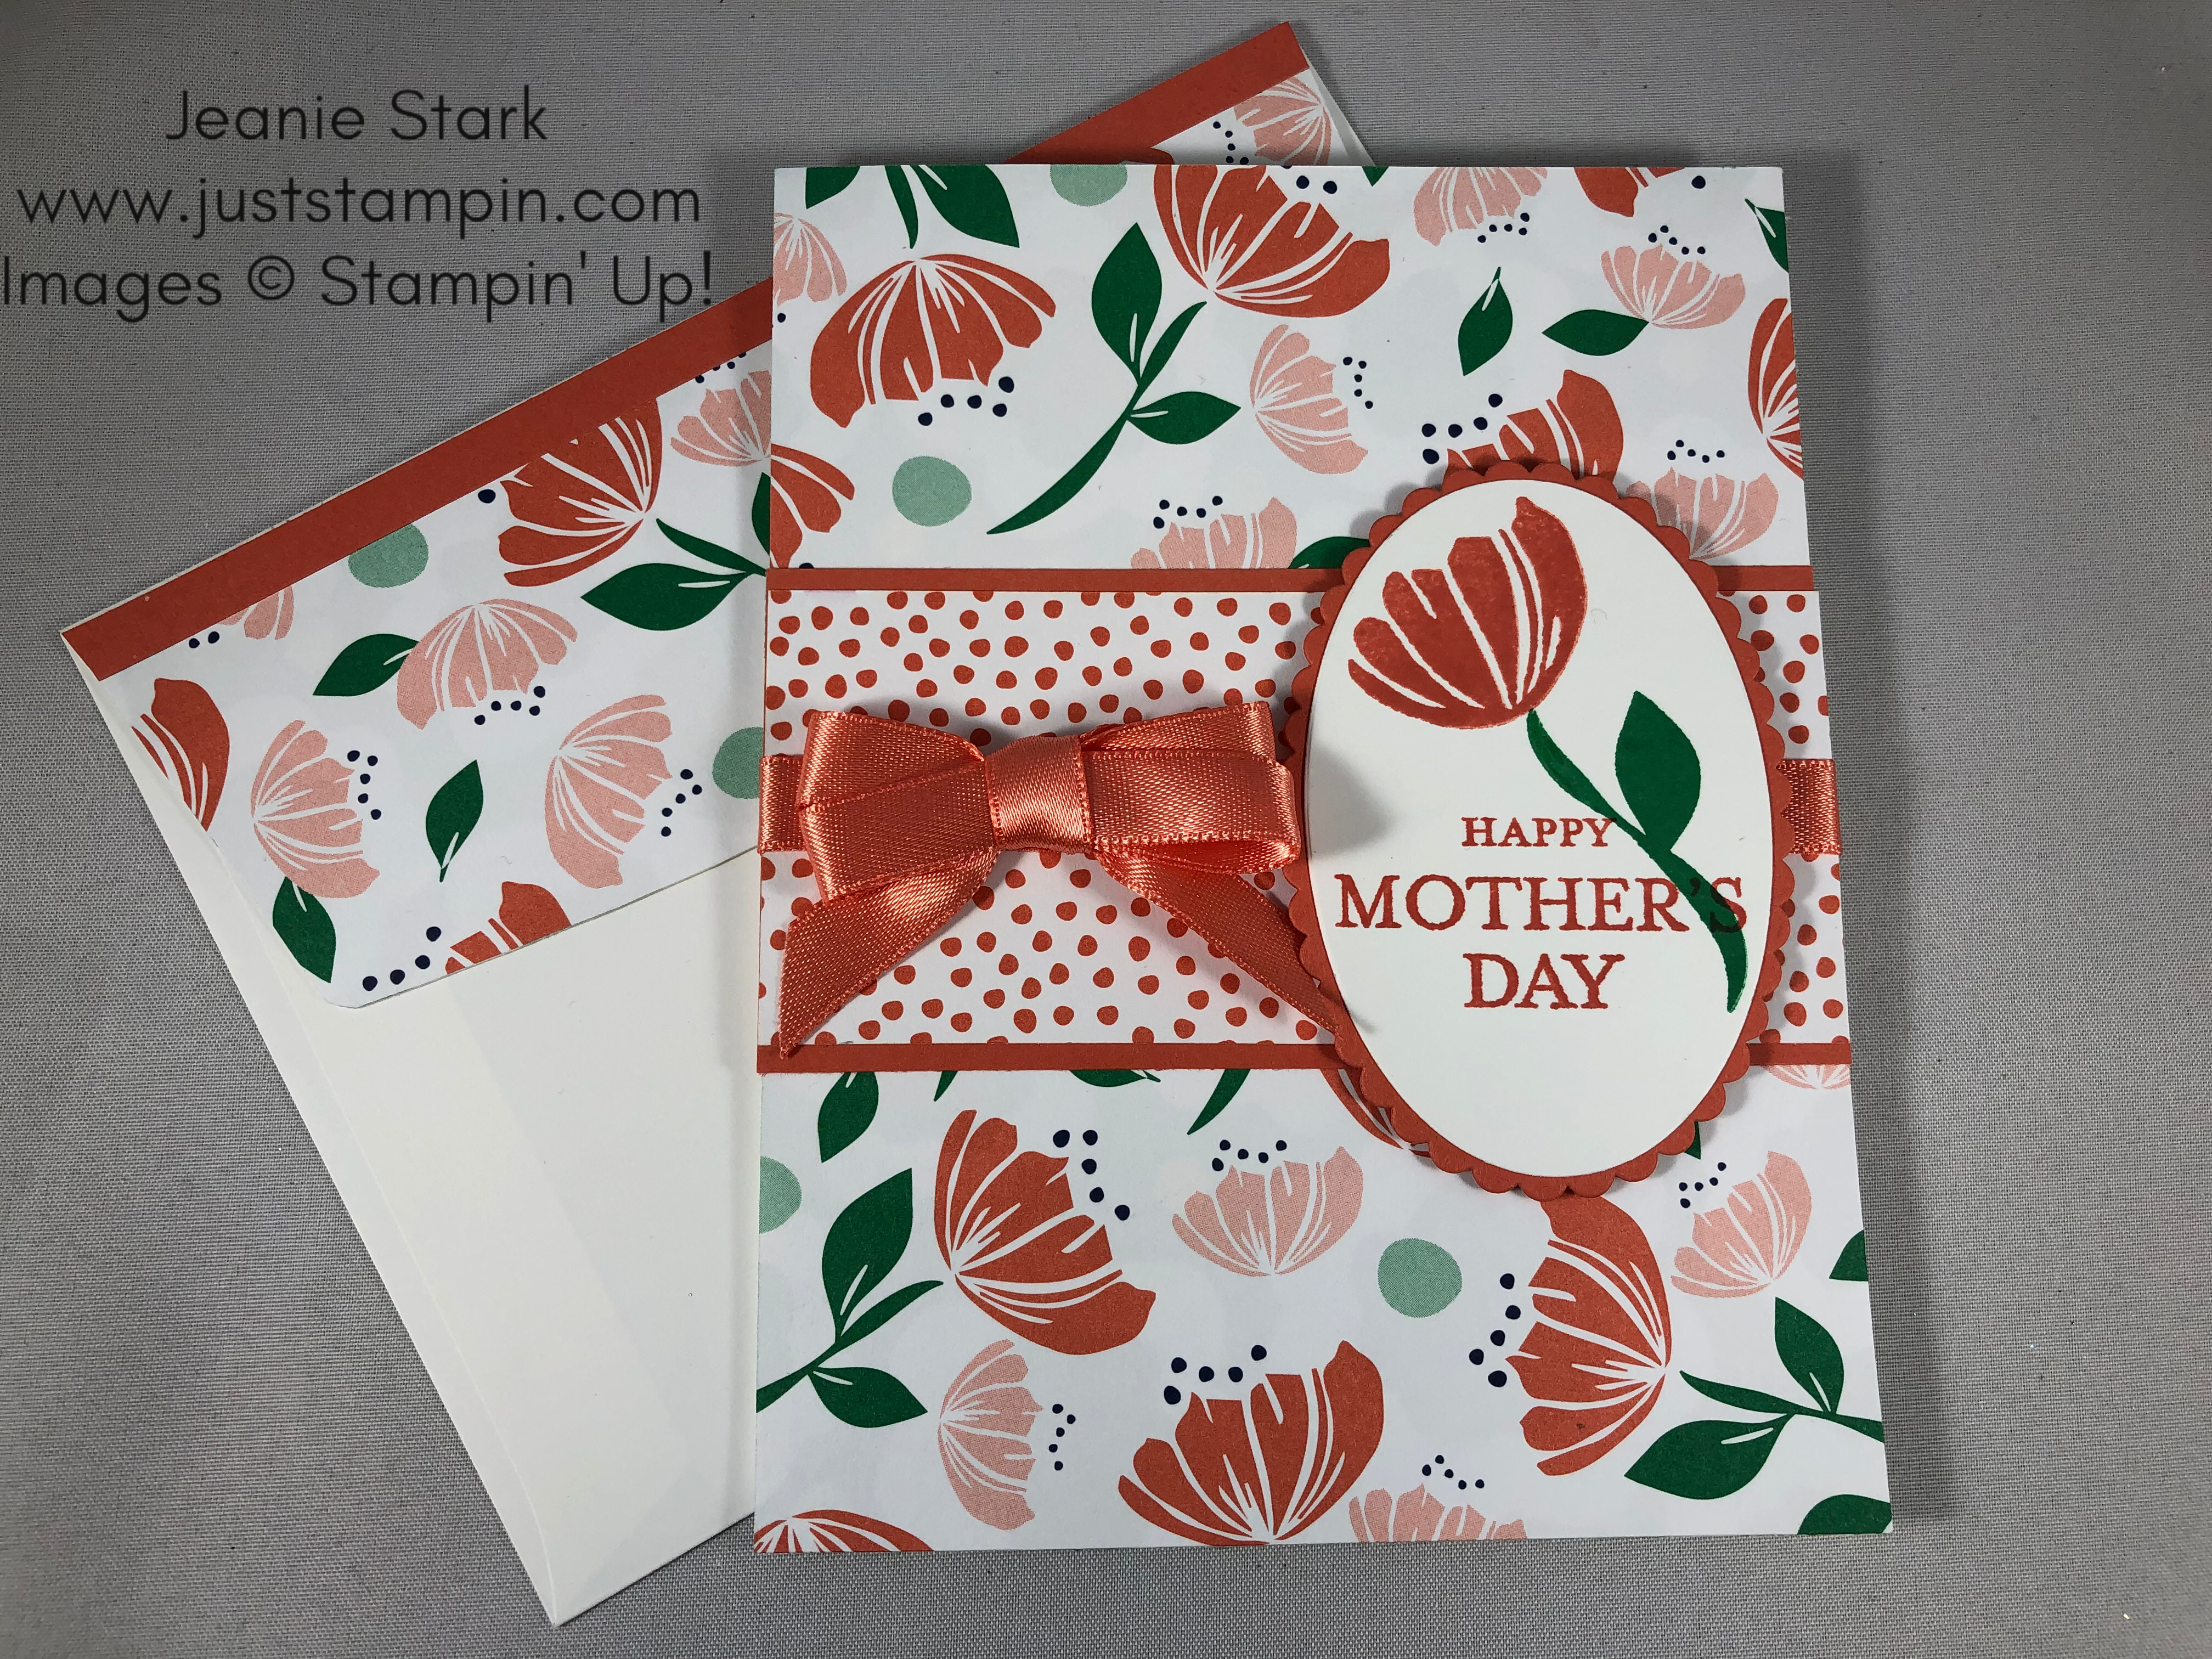 Stampin Up Mother's Day card idea using Happiness Blooms Designer Series Paper with Just Because and Bloom By Bloom stamp sets - Jeanie Stark StampinUp